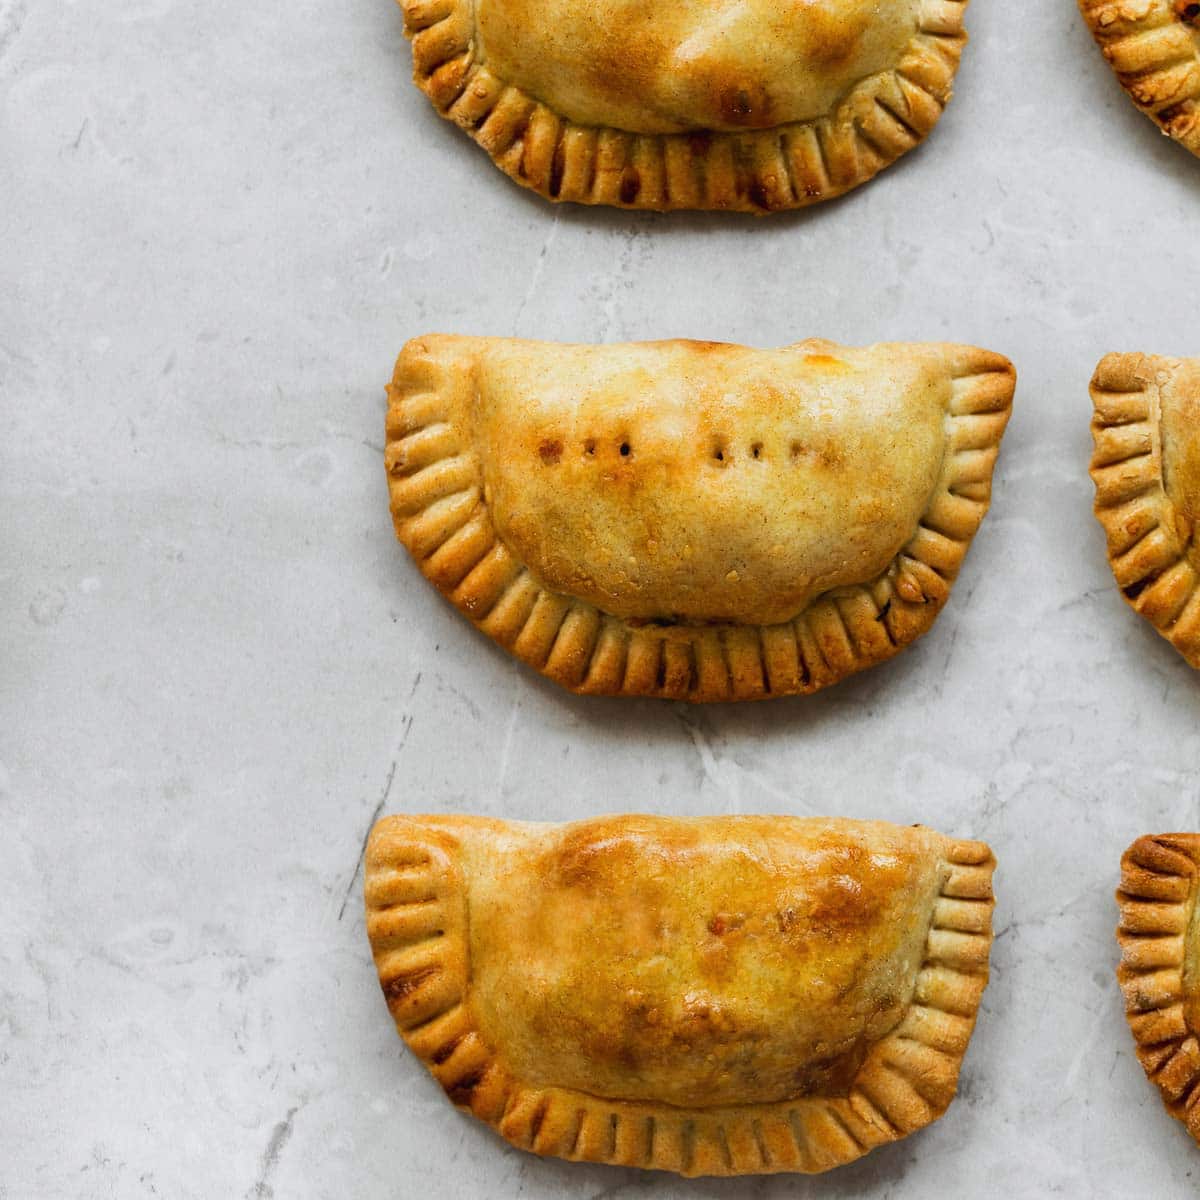 Empanadas can be successfully reheated from various conditions. You might want to warm them from frozen, or straight out of the refrigerator. Or after they’ve been standing around for a little while at room temperature.